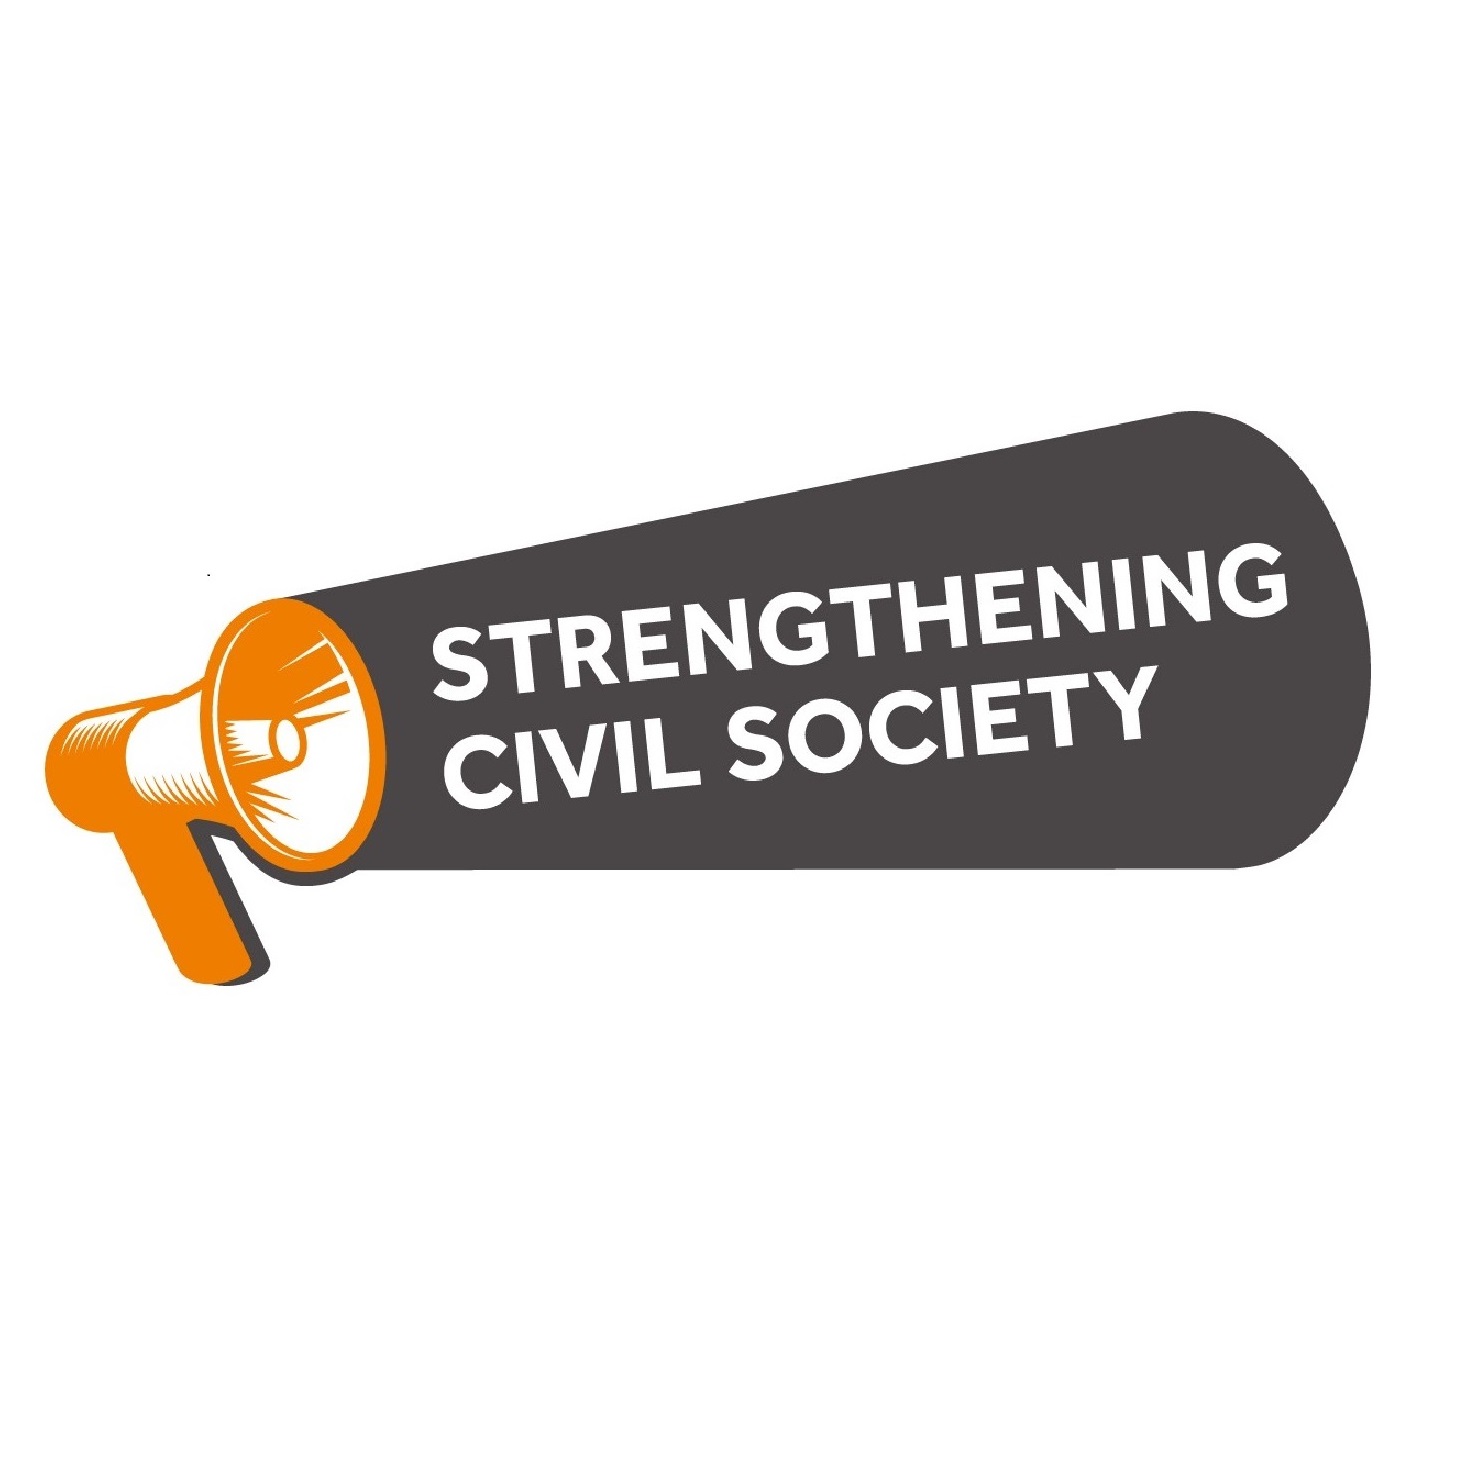 Civic space in the context of Strengthening Civil Society